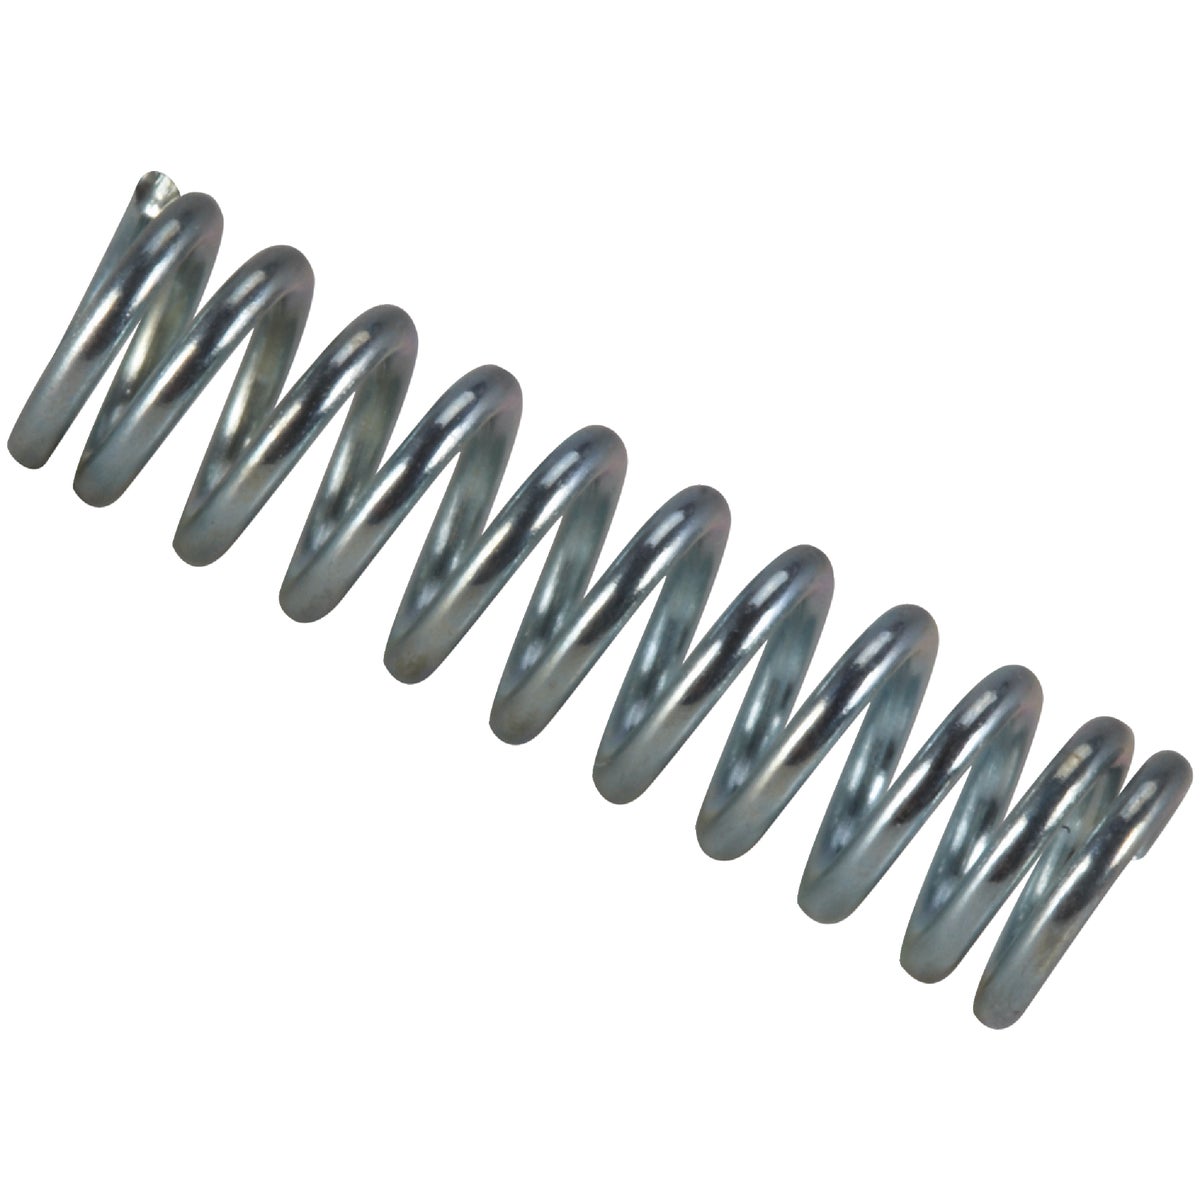 Century Spring 3-1/2 In. x 3/4 In. Compression Spring (2 Count)